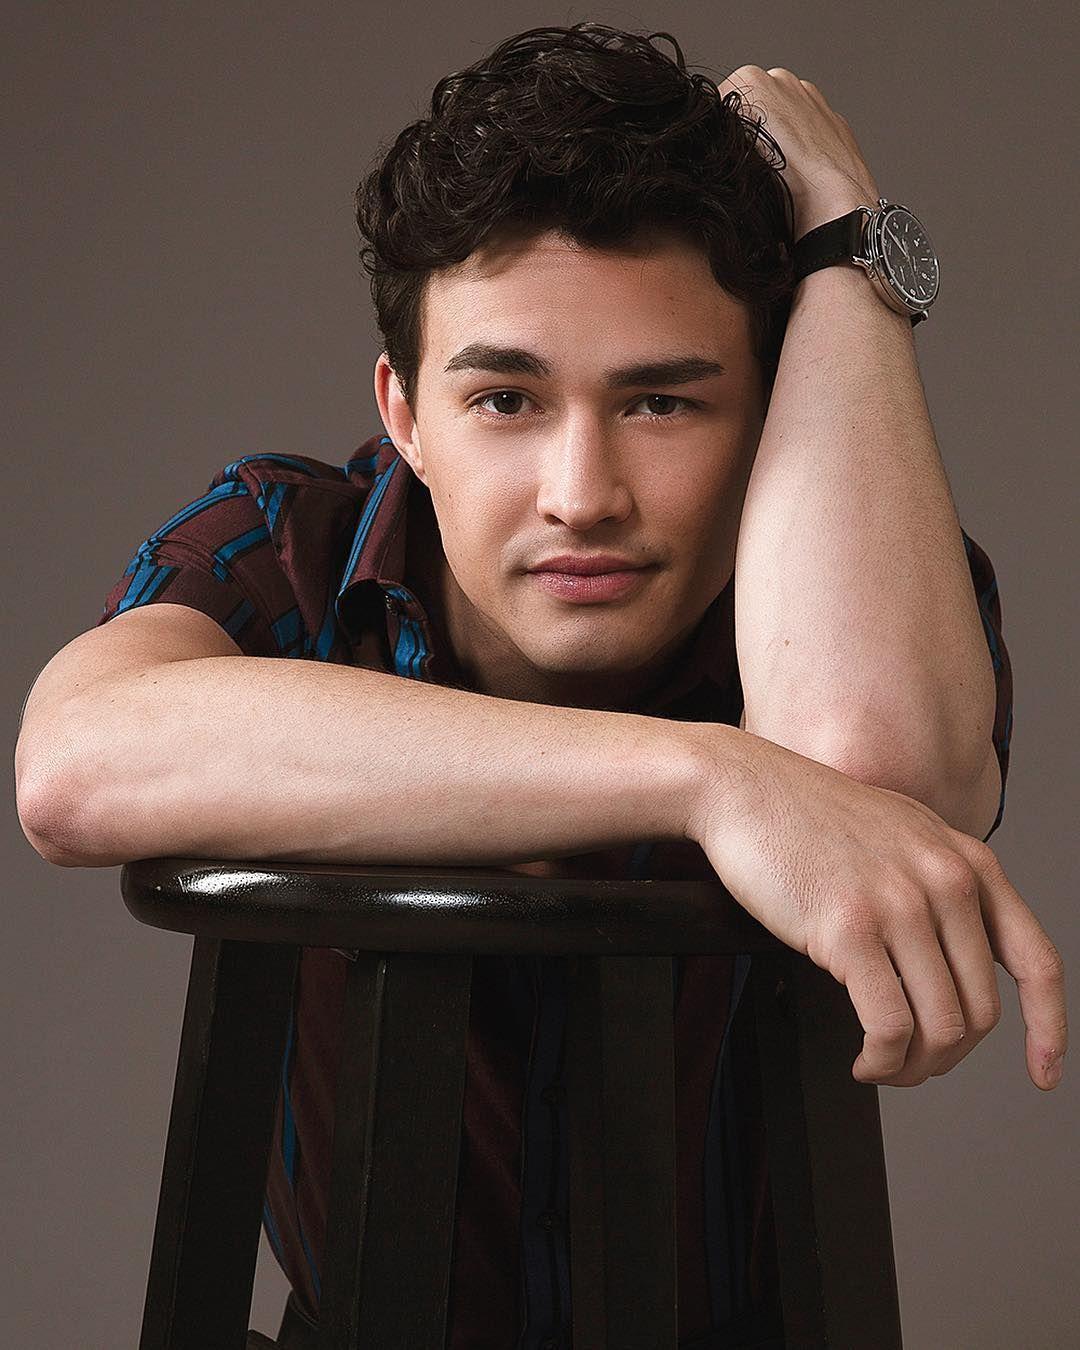 HOW TO USE A STOOL, THE GAVIN LEATHERWOOD EDITION” in 2020